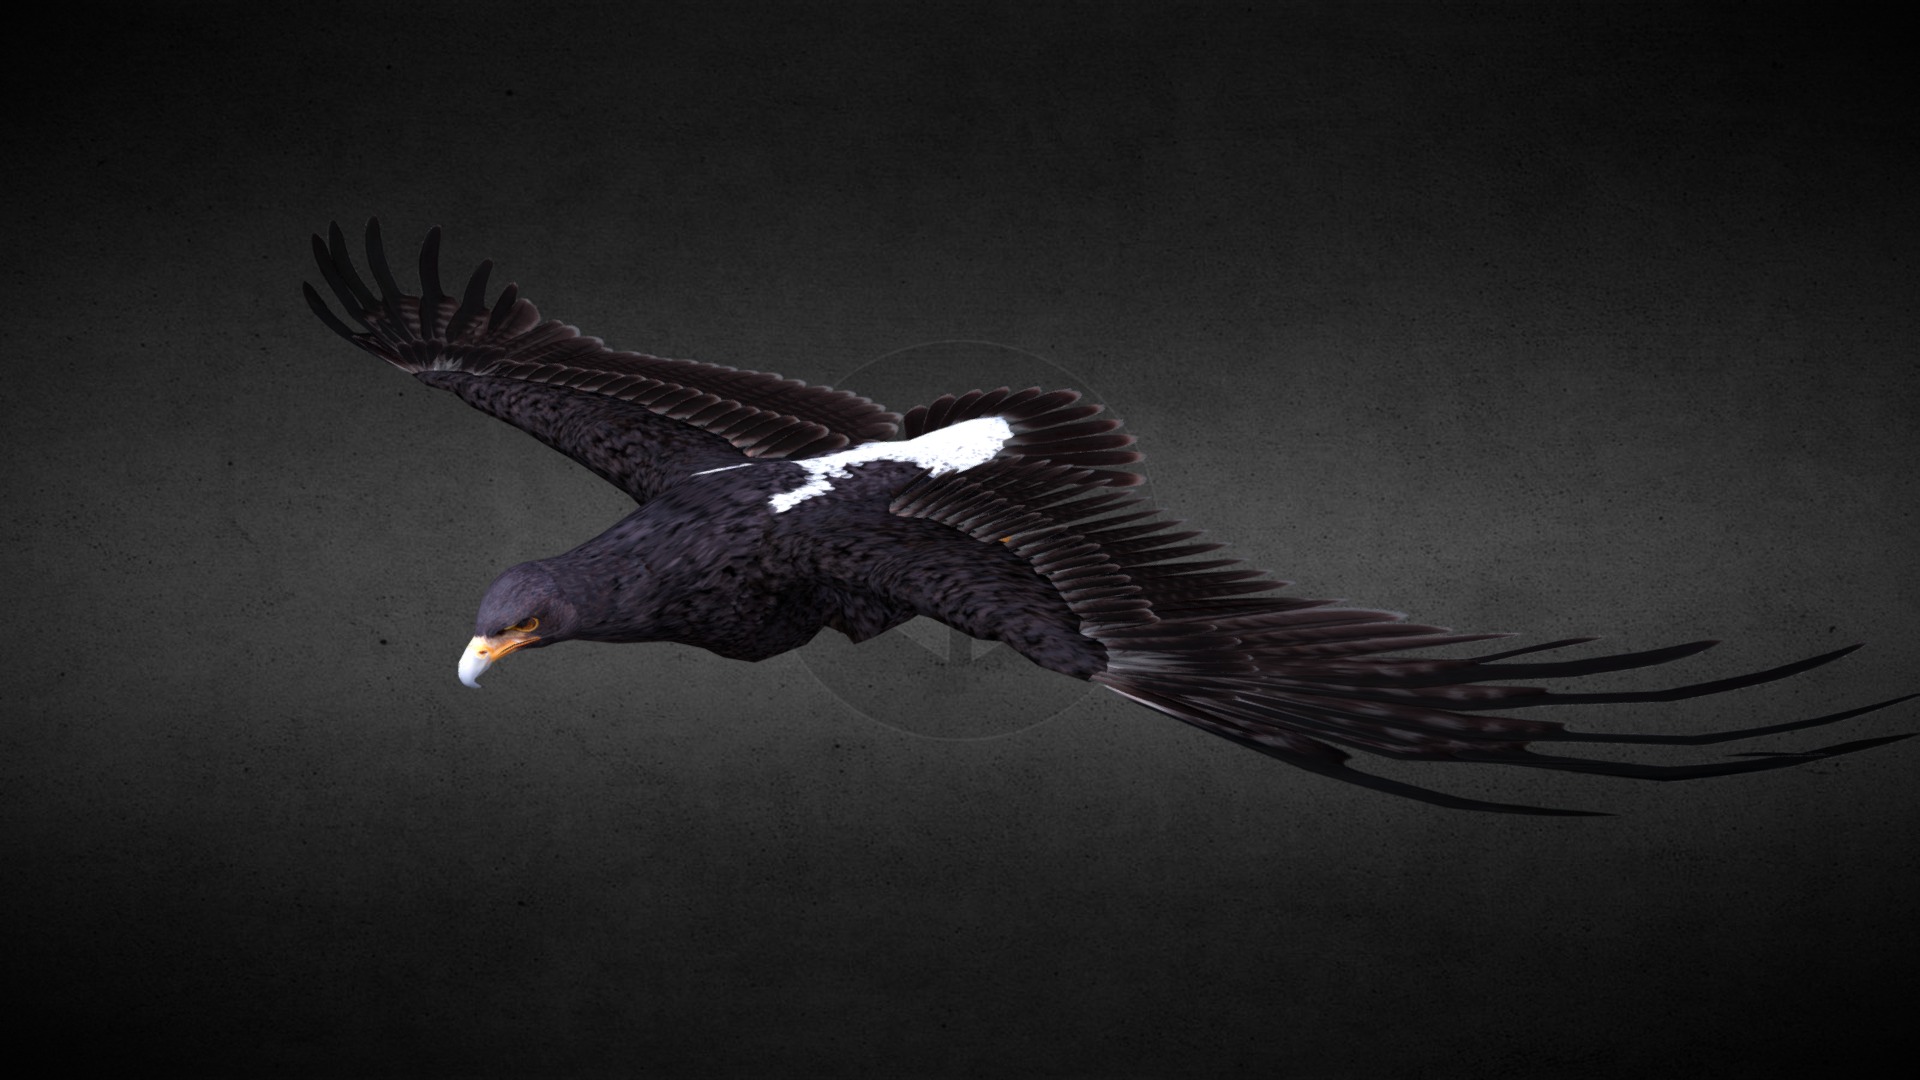 3D model Aquilla Verreauxii (Black eagle) - This is a 3D model of the Aquilla Verreauxii (Black eagle). The 3D model is about a bird flying in the air.